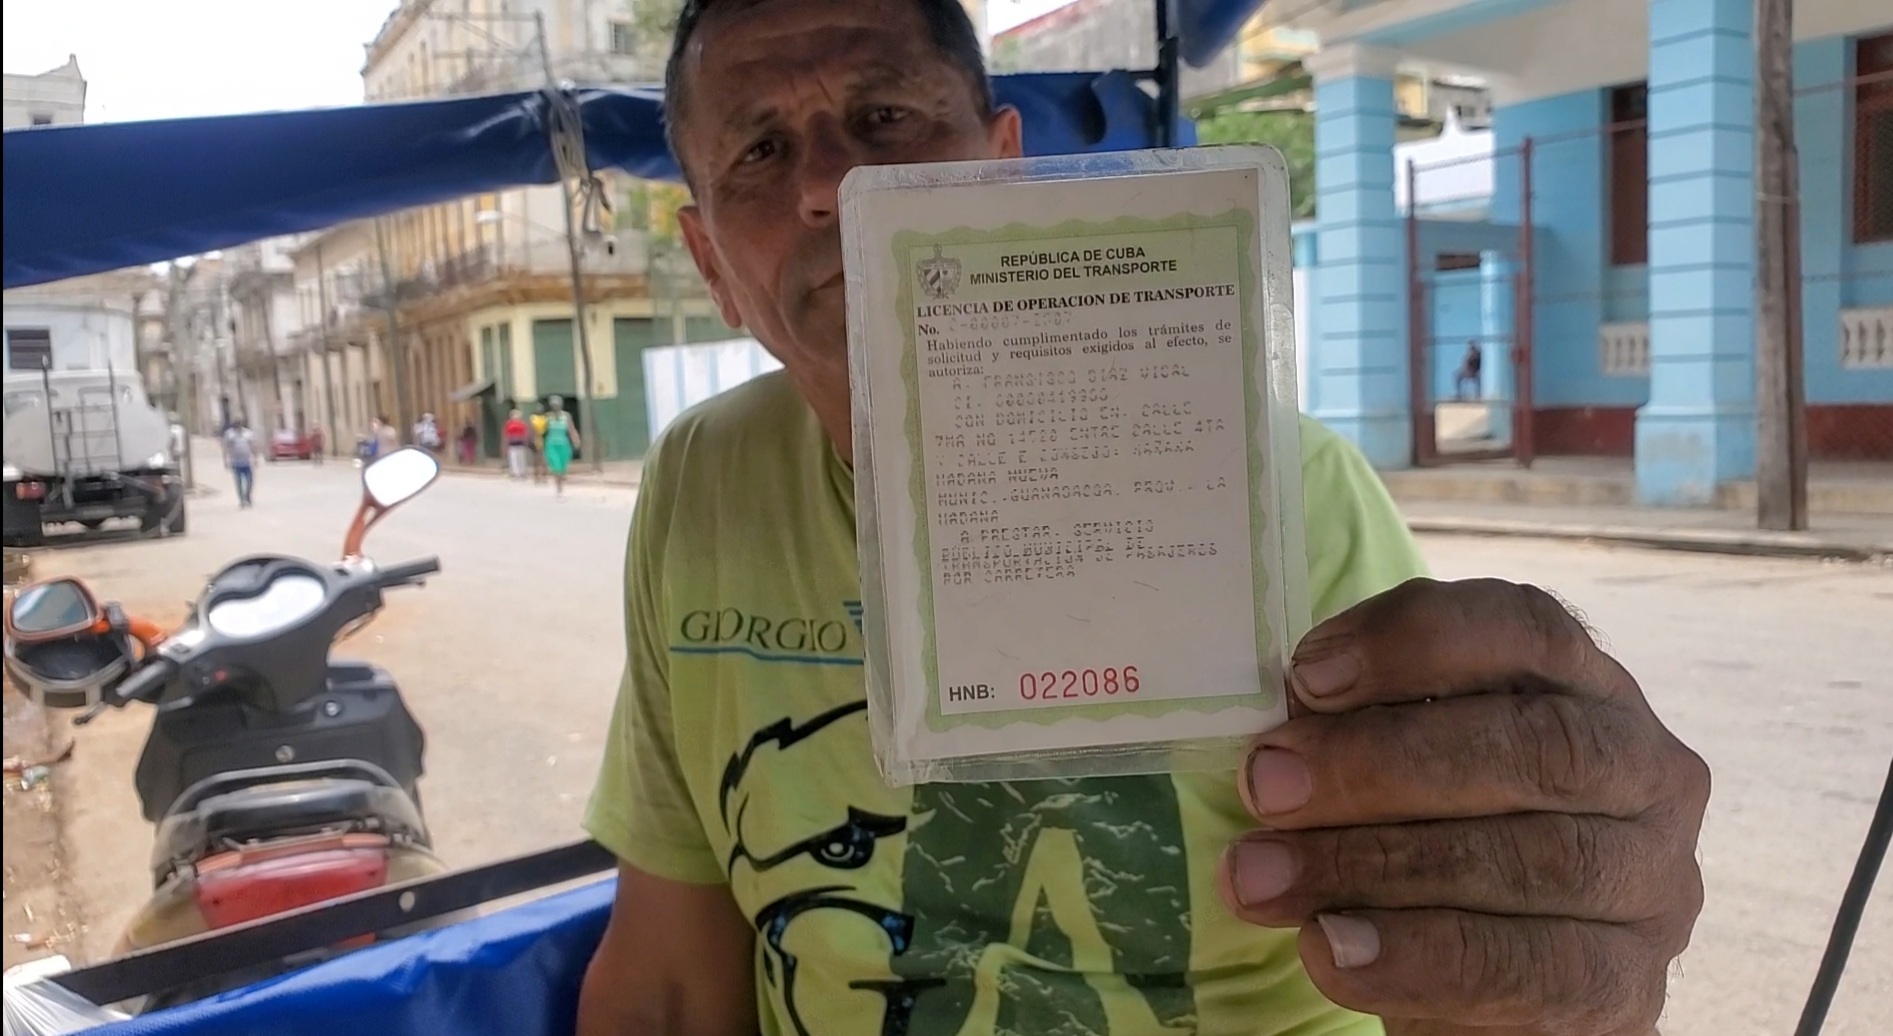 Pedicab drivers from Centro Habana and Guanabacoa are fined for providing service in Old Havana